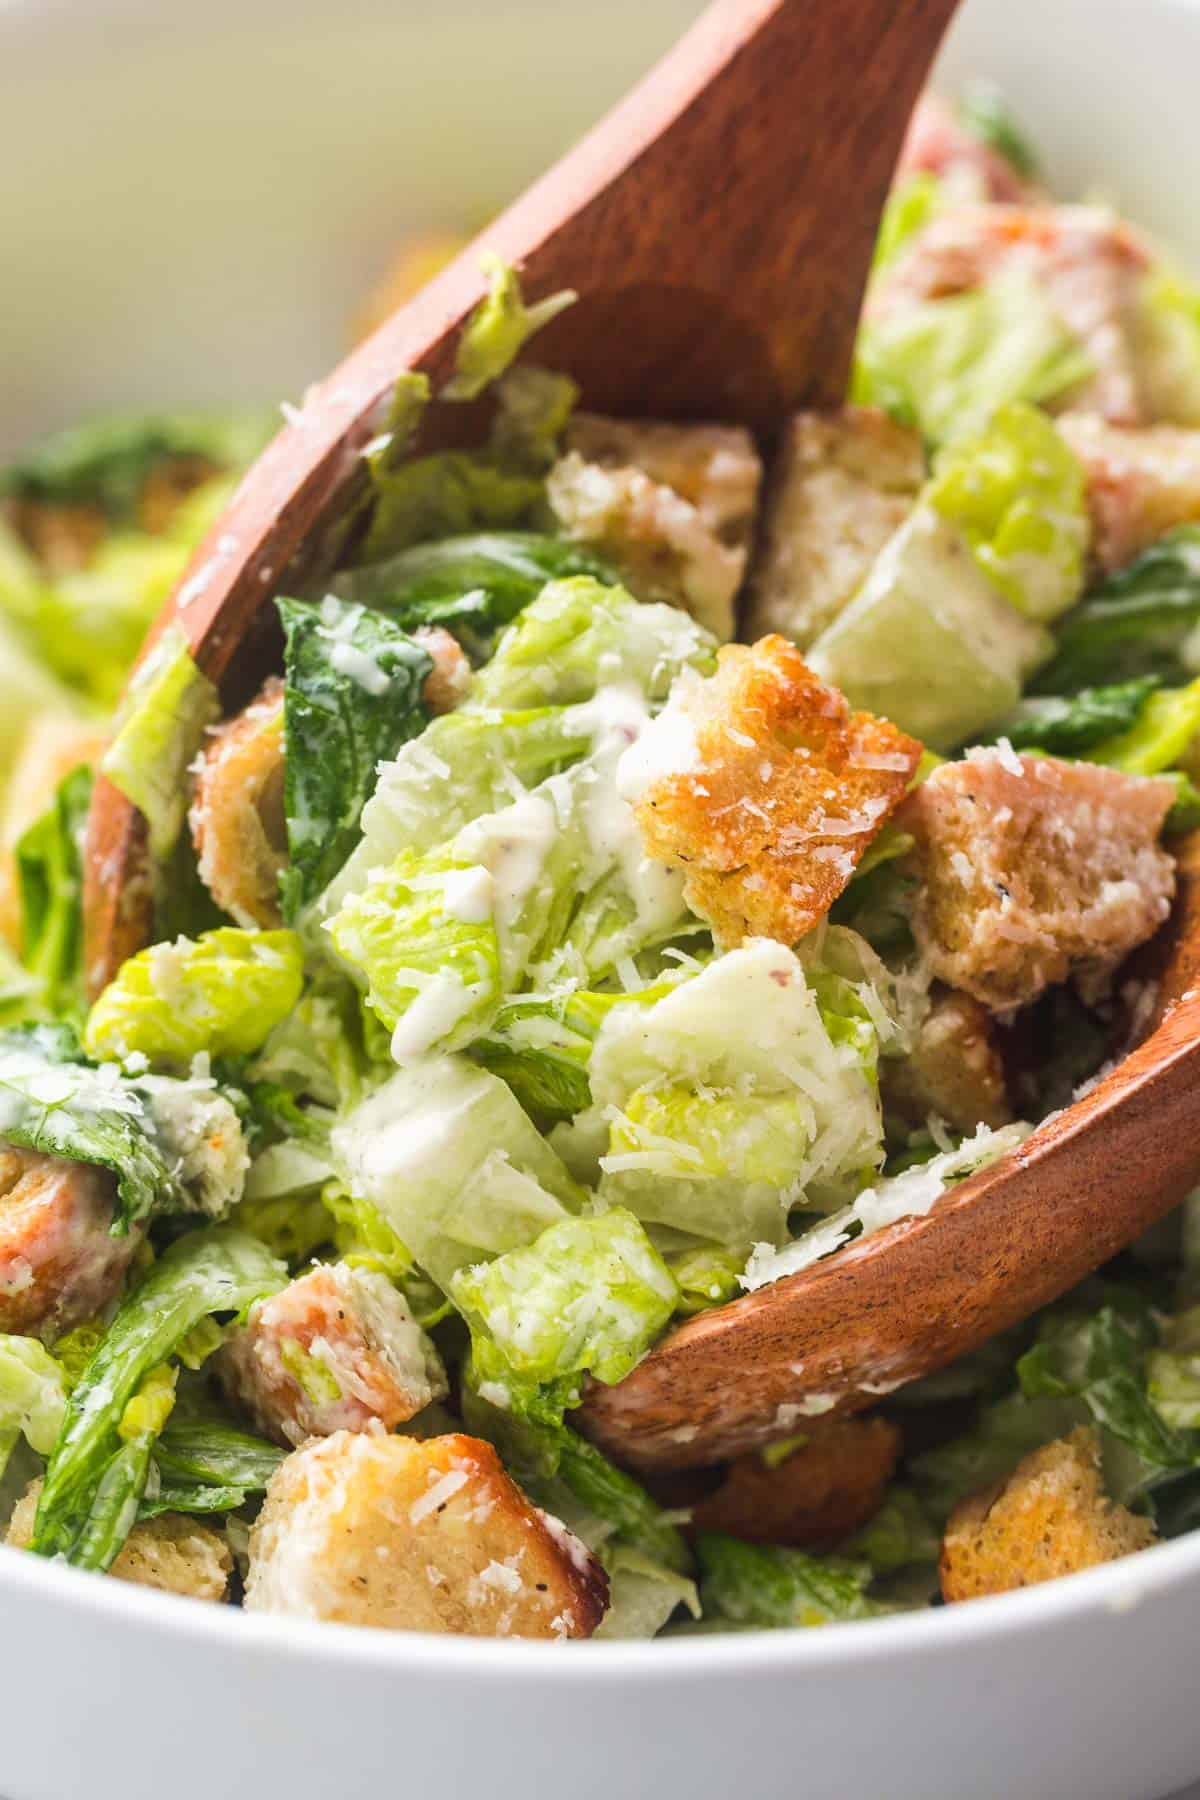 Caesar dressing in a Caesar salad and crunchy croutons